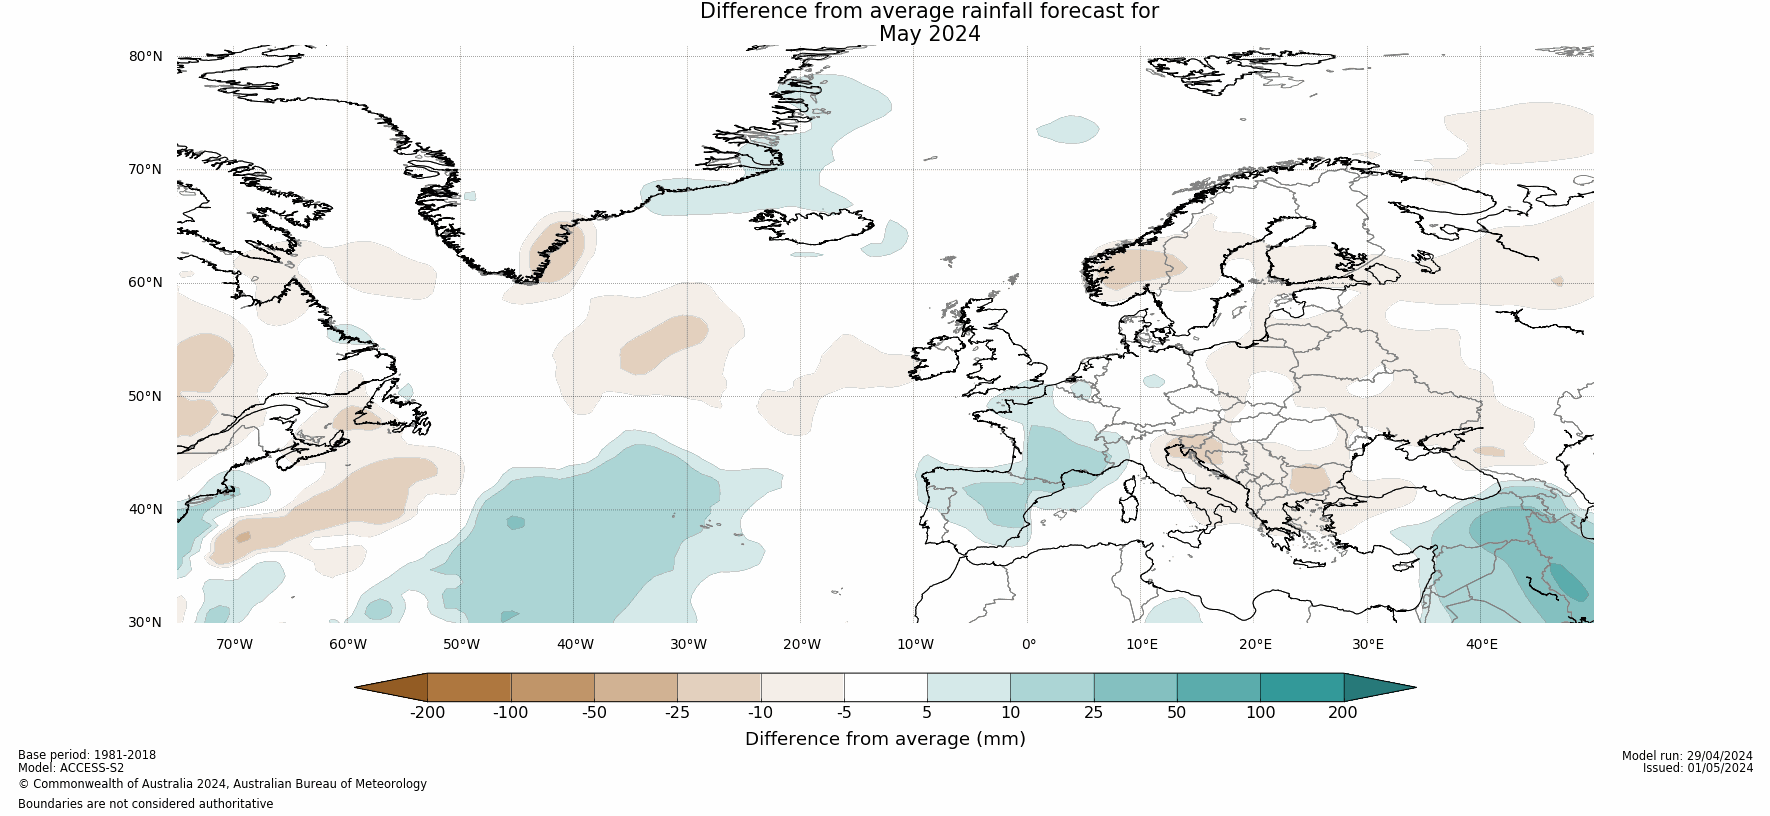 rain.forecast.anom.europe.month1.png